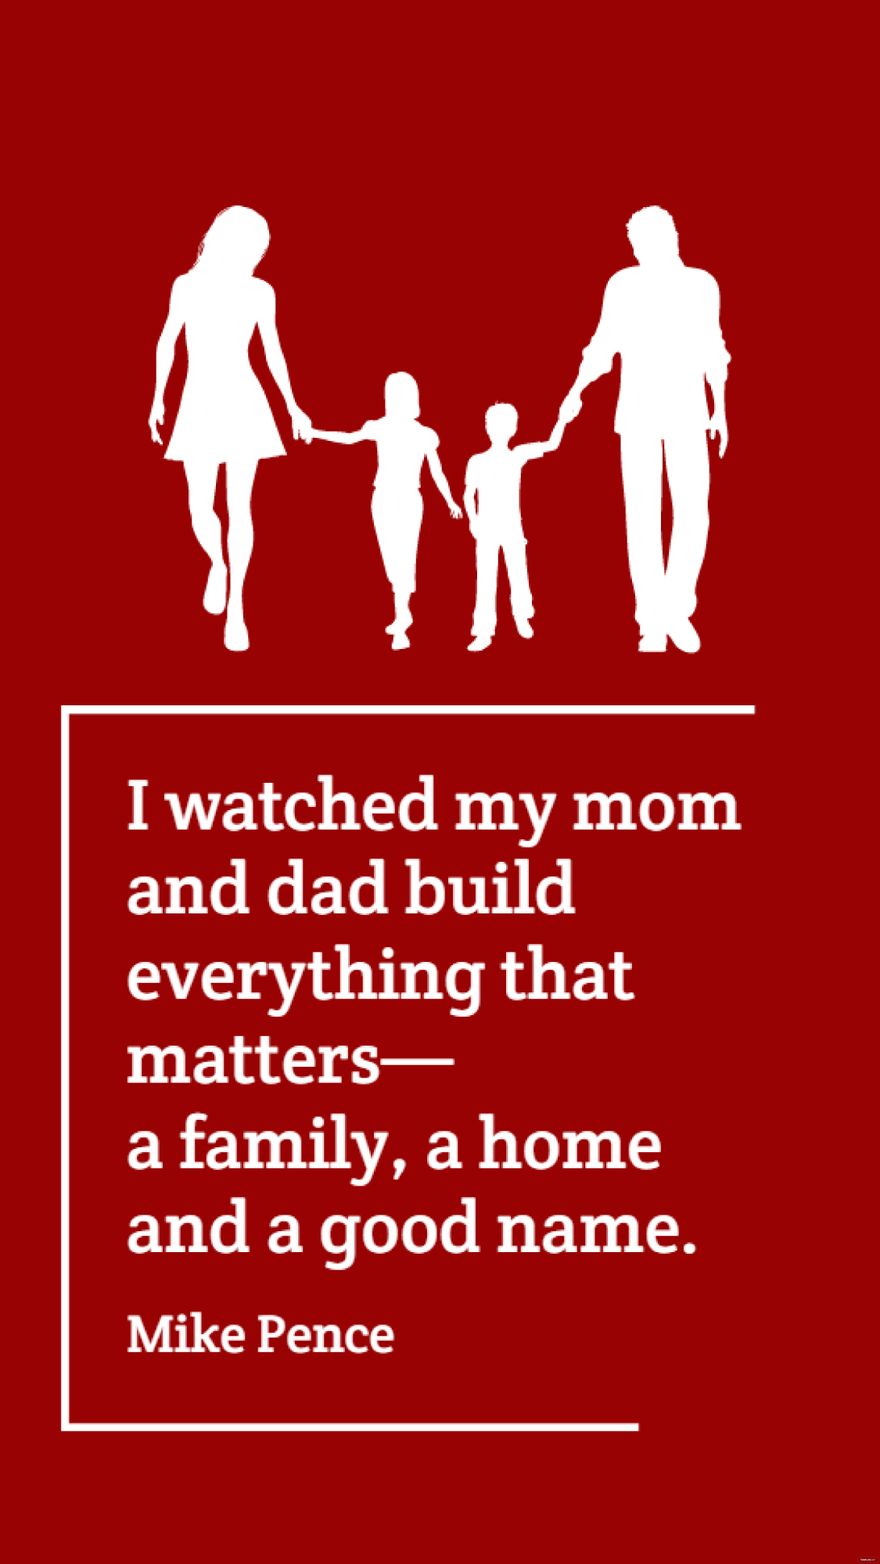 Mike Pence - I watched my mom and dad build everything that matters - a family, a home and a good name. in JPG